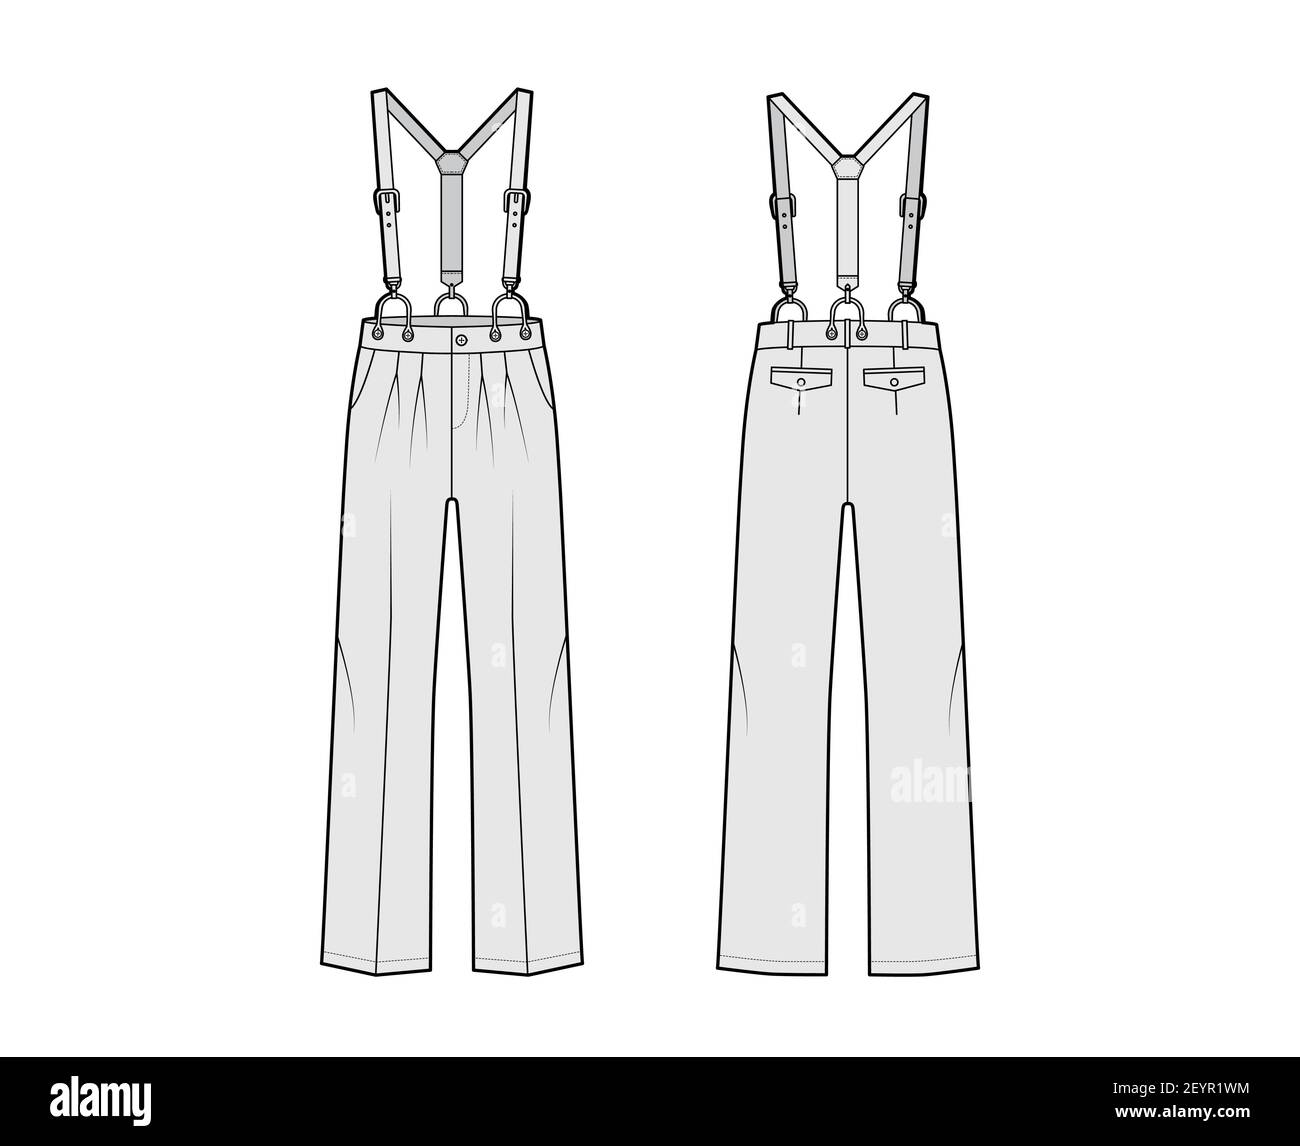 Suspender Pants Dungarees technical fashion illustration with full length, low waist, rise, pockets. Flat apparel garment bottom front back, grey color style. Women, men unisex CAD mockup Stock Vector